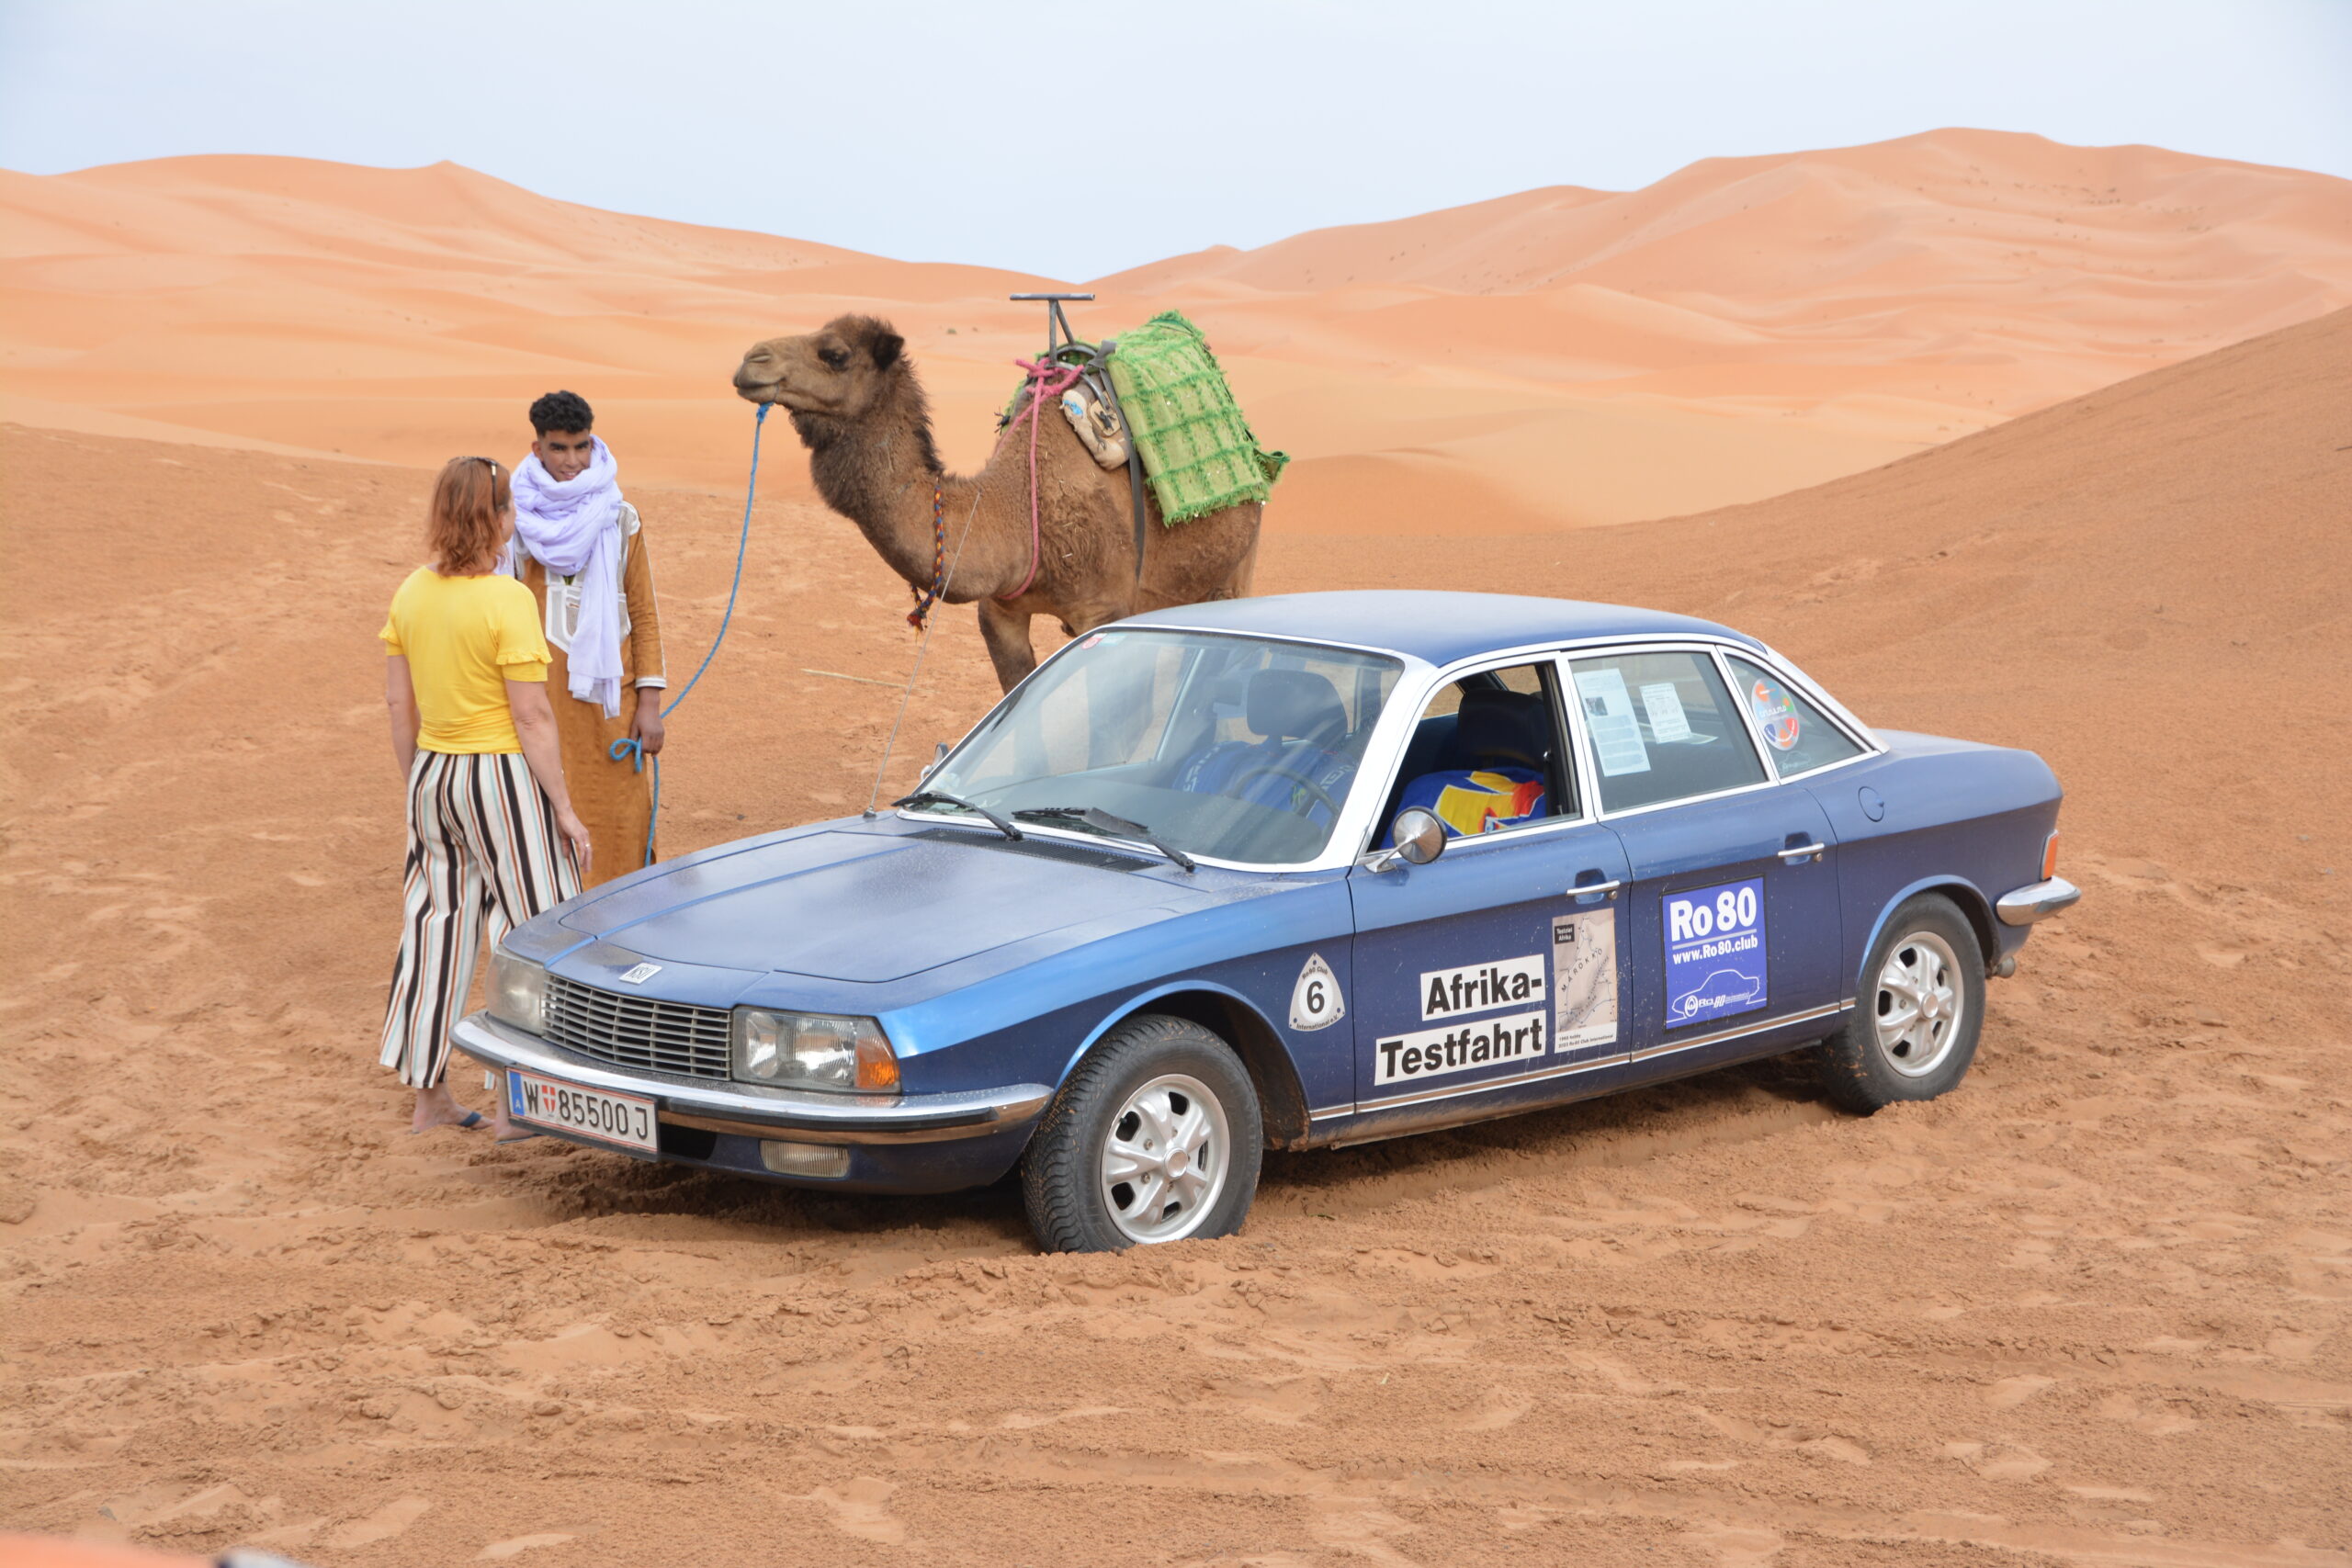 A road less travelled: across the Sahara in an NSU Ro 80 - Magneto